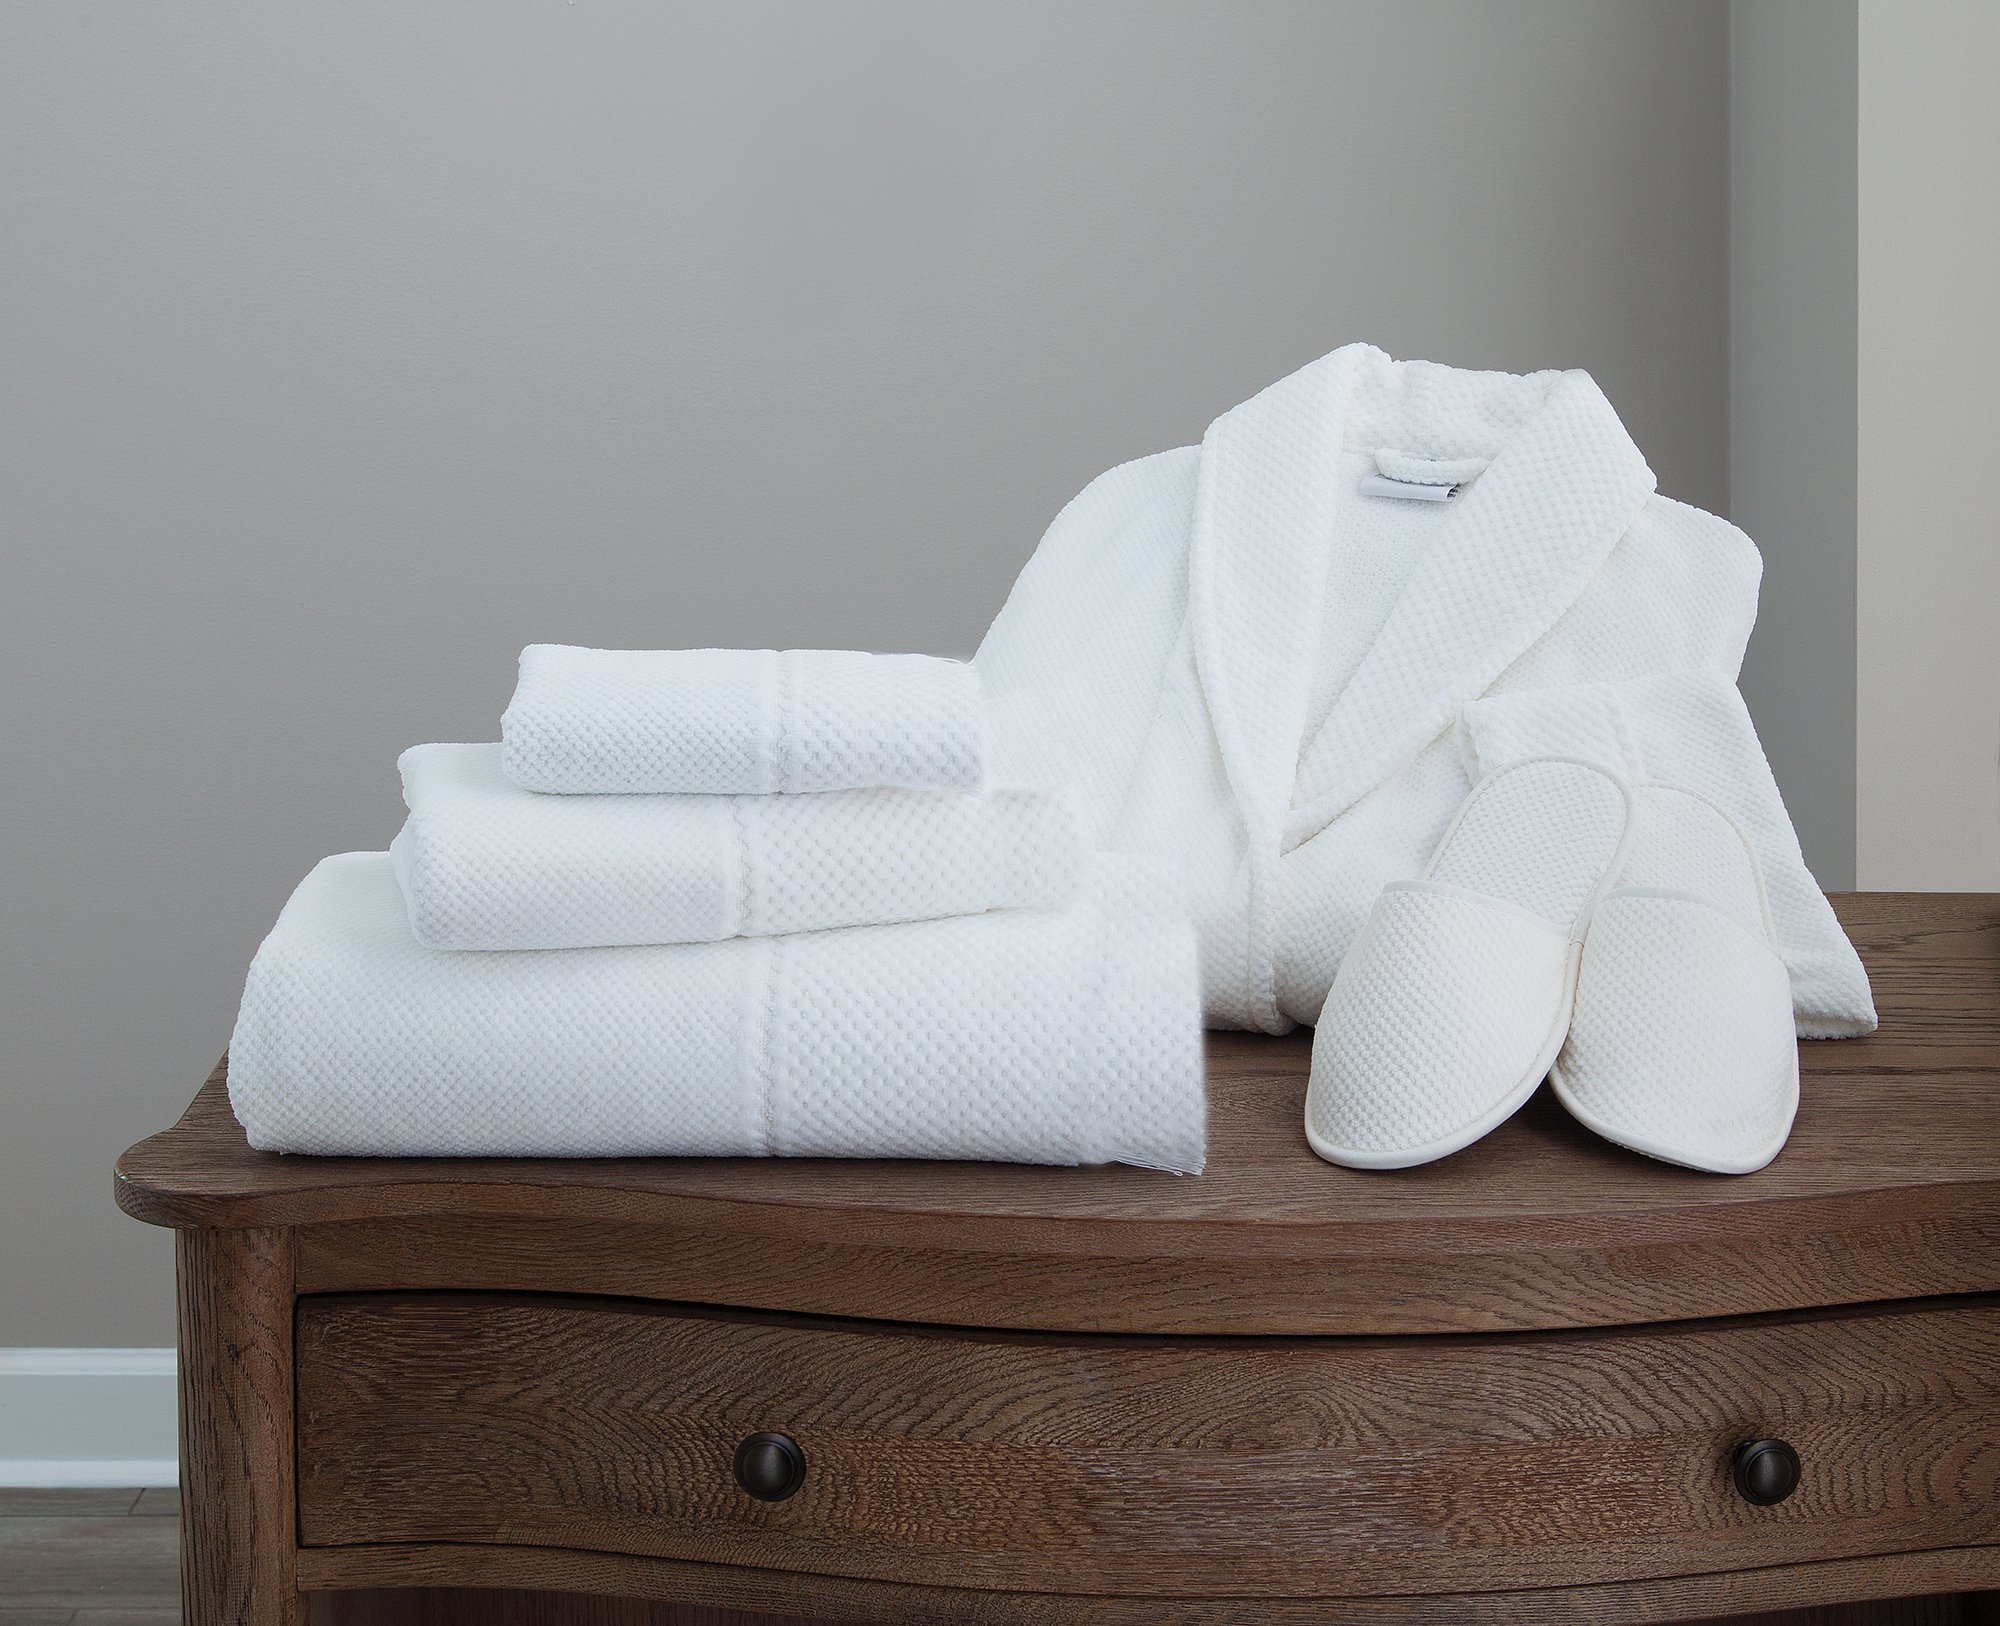 Spa Collection Towel Set - DownTown Company